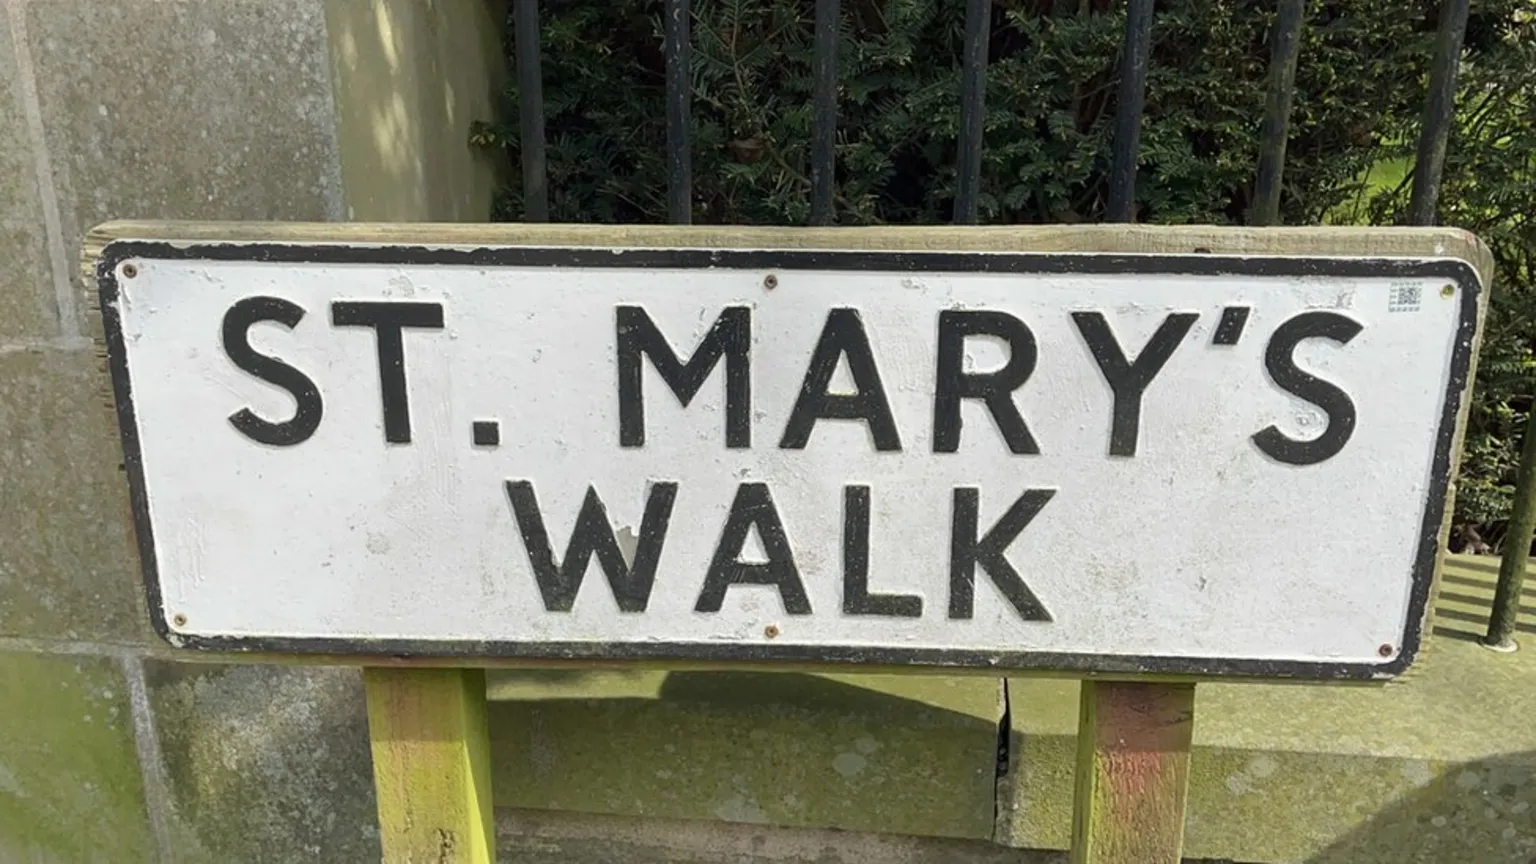 More information about "North Yorkshire Council to phase out apostrophe use on street signs"